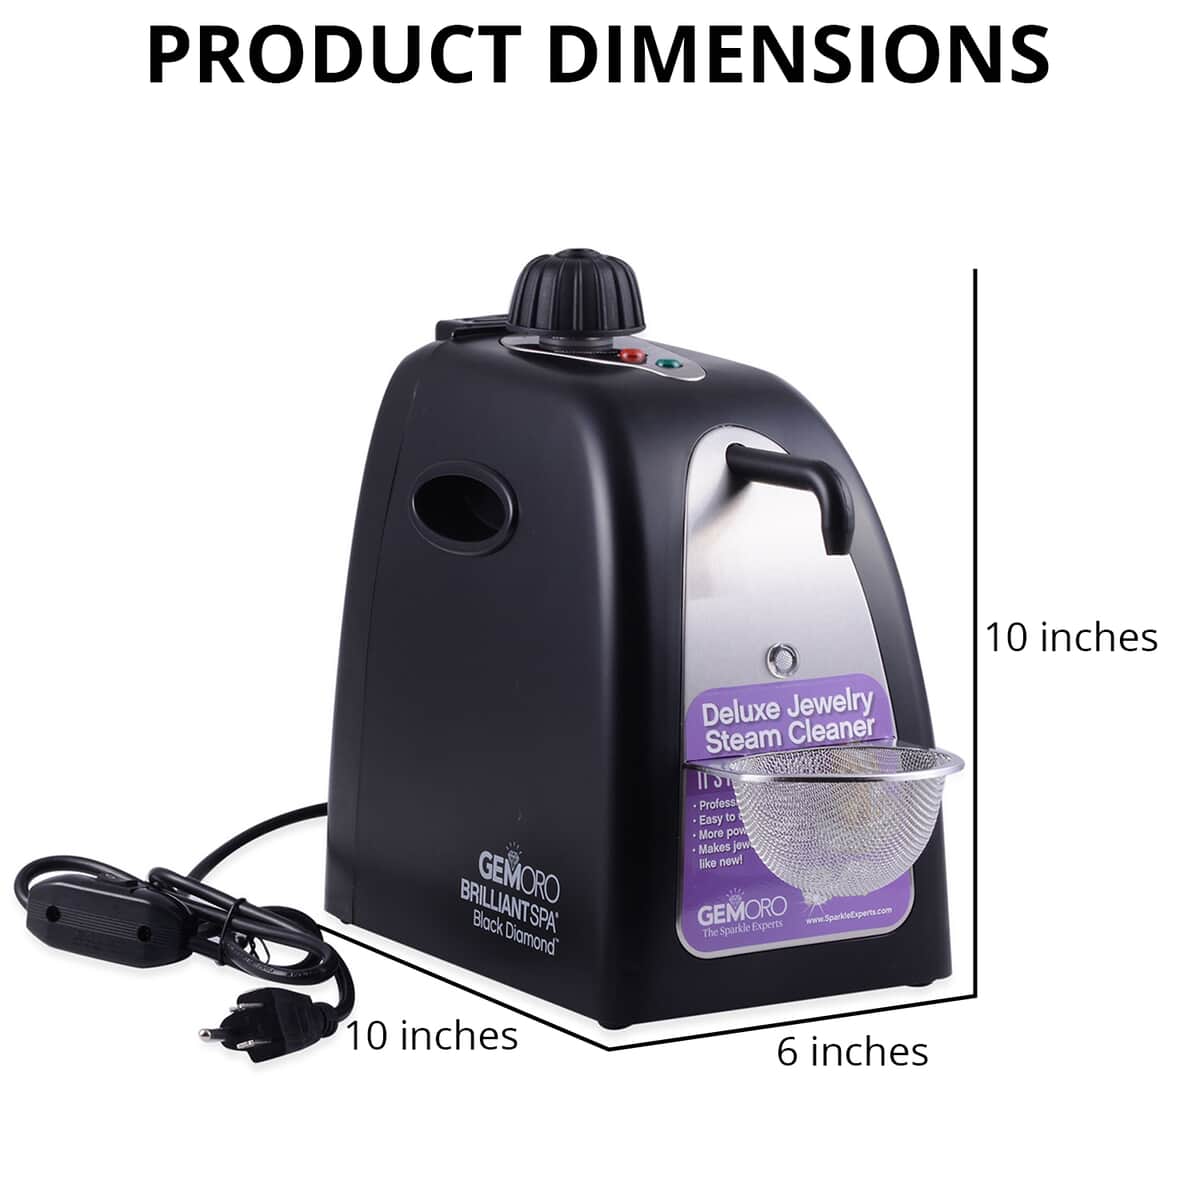 GEMORO Brilliant Spa Black Diamond: Deluxe Personal Jewelry Steam Cleaner image number 4